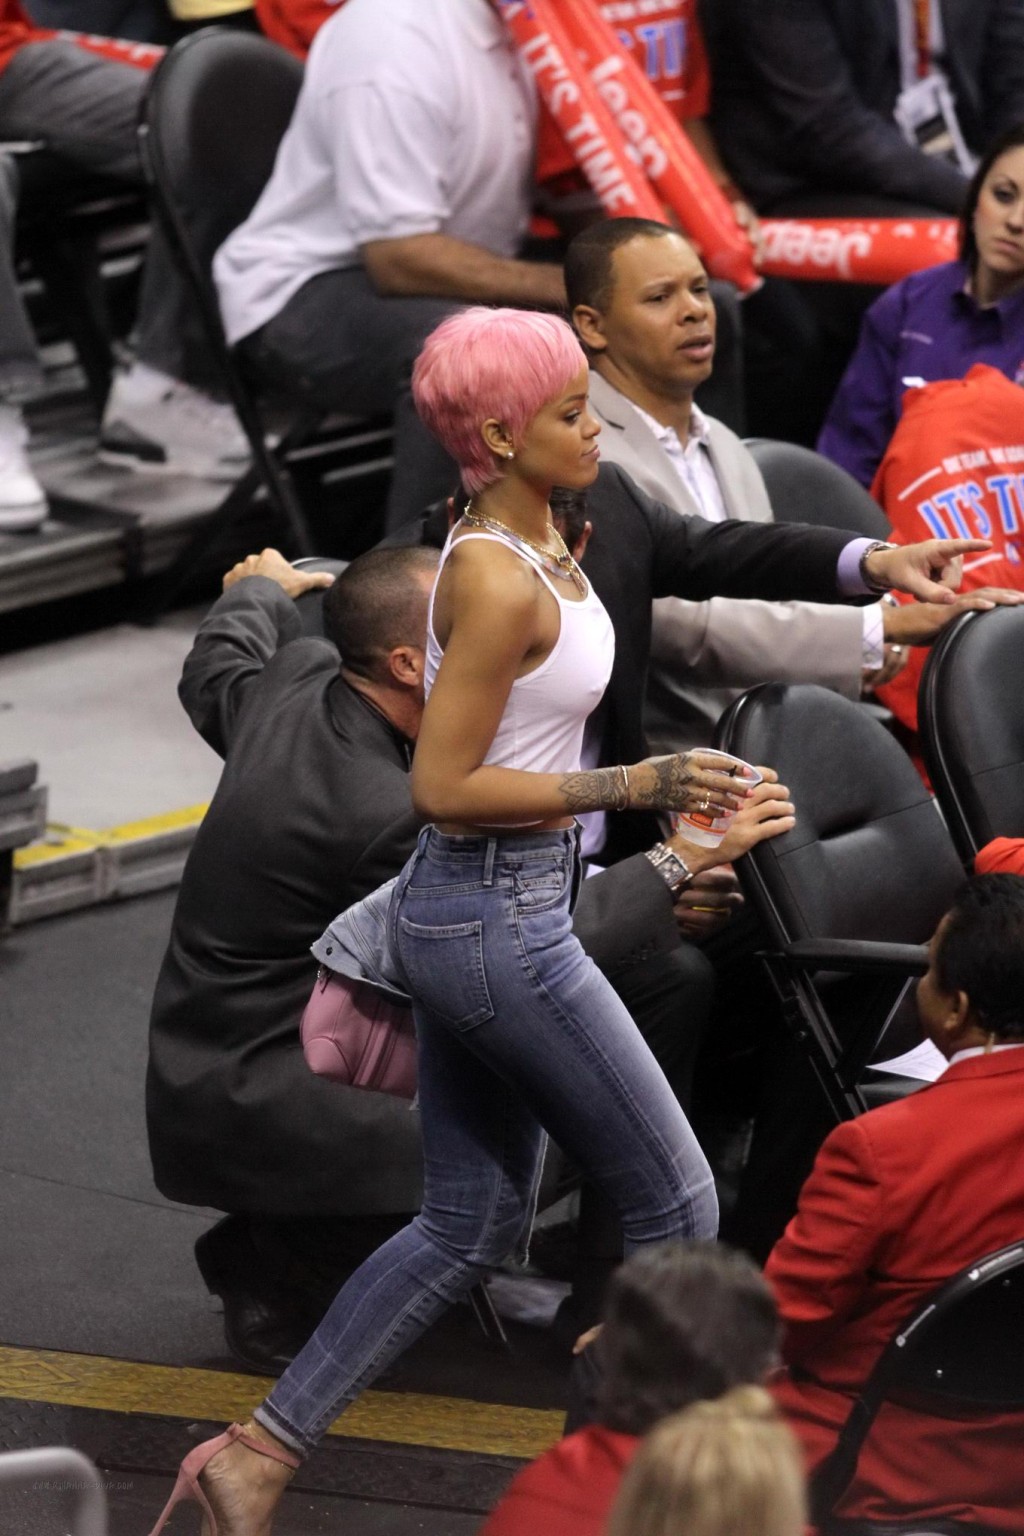 Rihanna braless wearing a white top at the Clippers game in LA #75196218